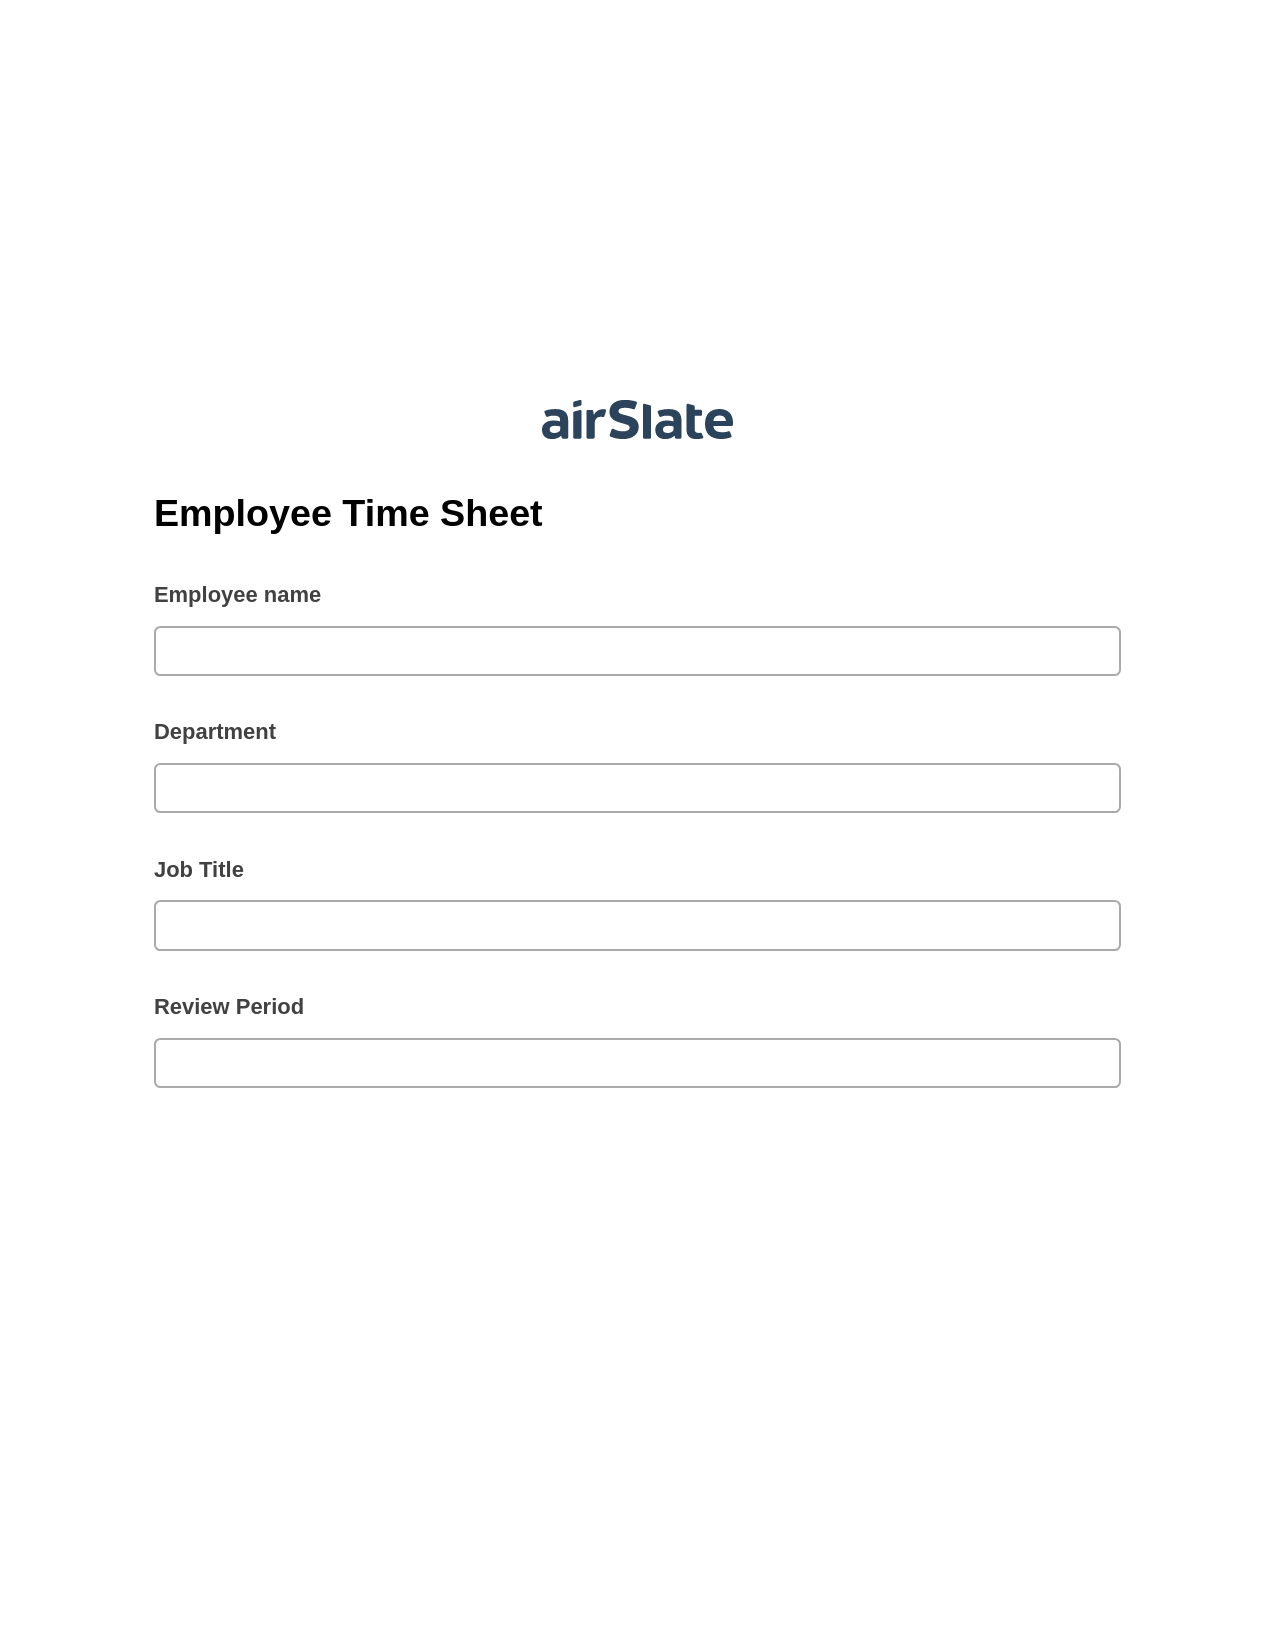 Multirole Employee Time Sheet Pre-fill from Excel Spreadsheet Bot, Update Audit Trail Bot, Archive to SharePoint Folder Bot